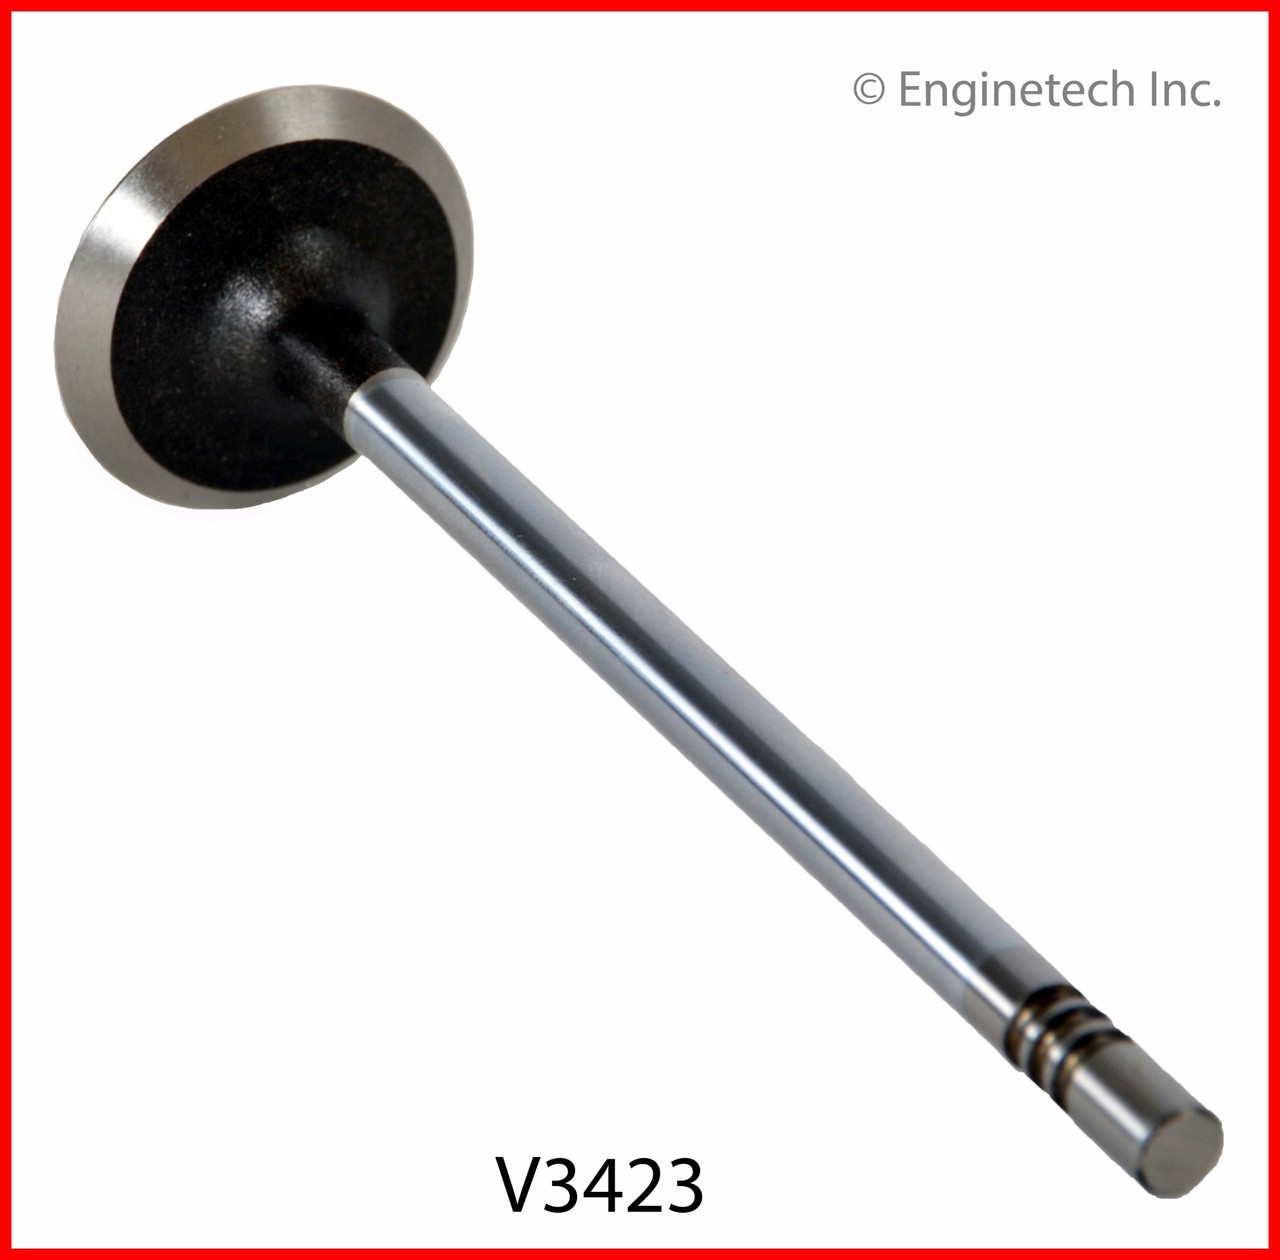 Exhaust Valve - 1998 Ford Taurus 3.0L (V3423.A5)